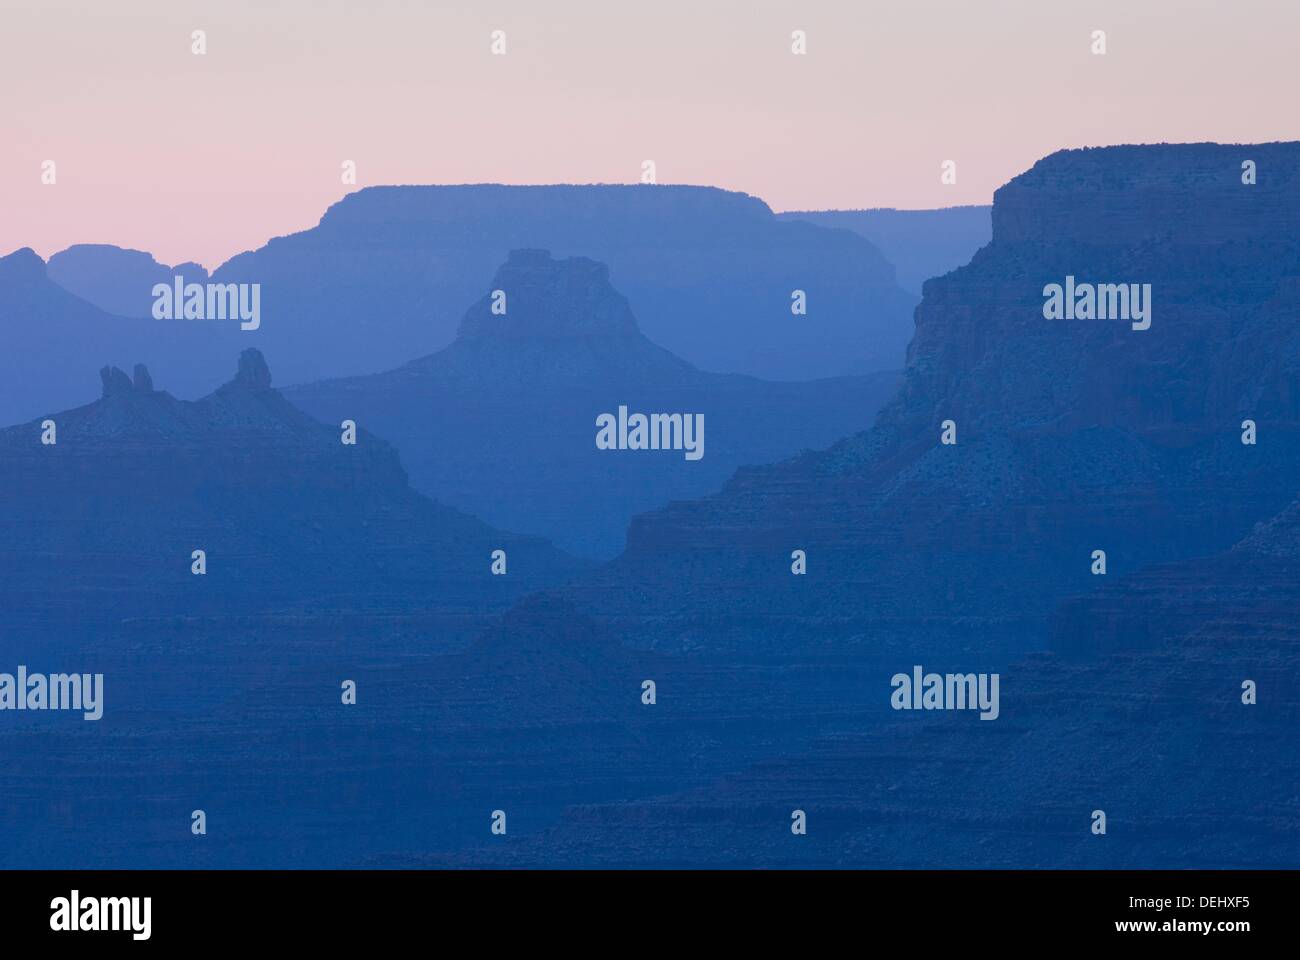 Silhouettes of overlapping mesas and buttes, Grand Canyon National Park Arizona Stock Photo